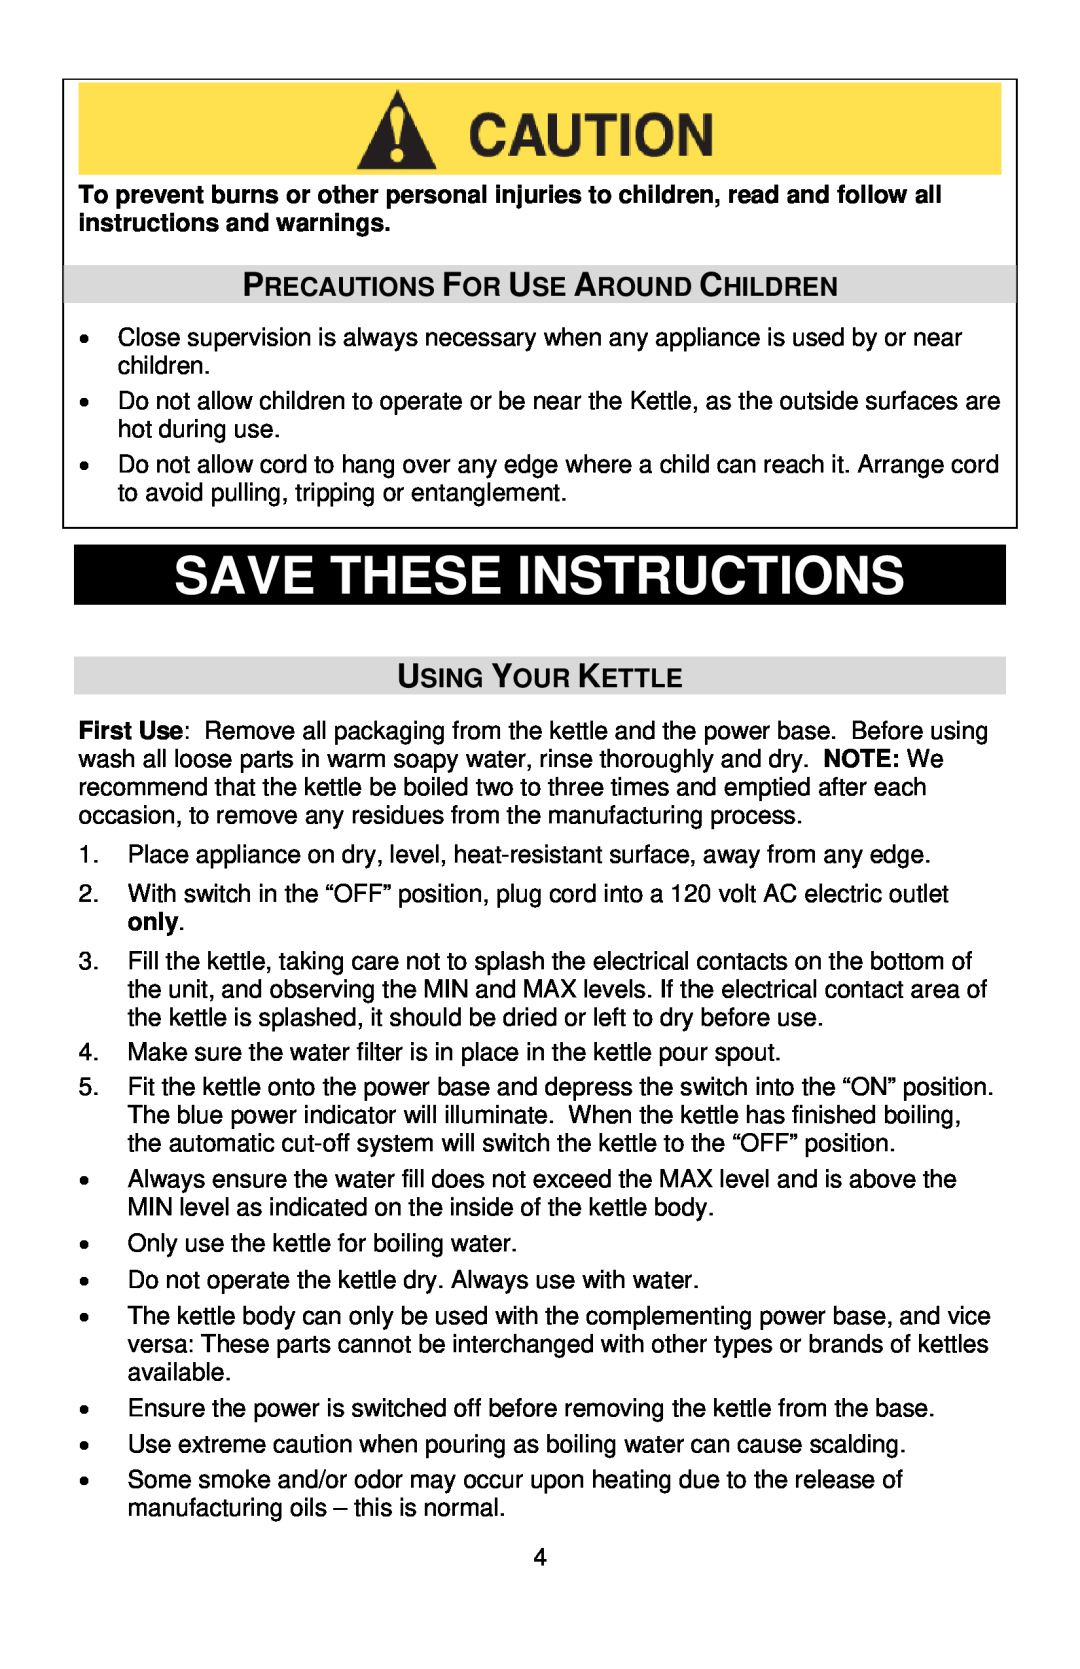 West Bend instruction manual Save These Instructions, Precautions For Use Around Children, Using Your Kettle 